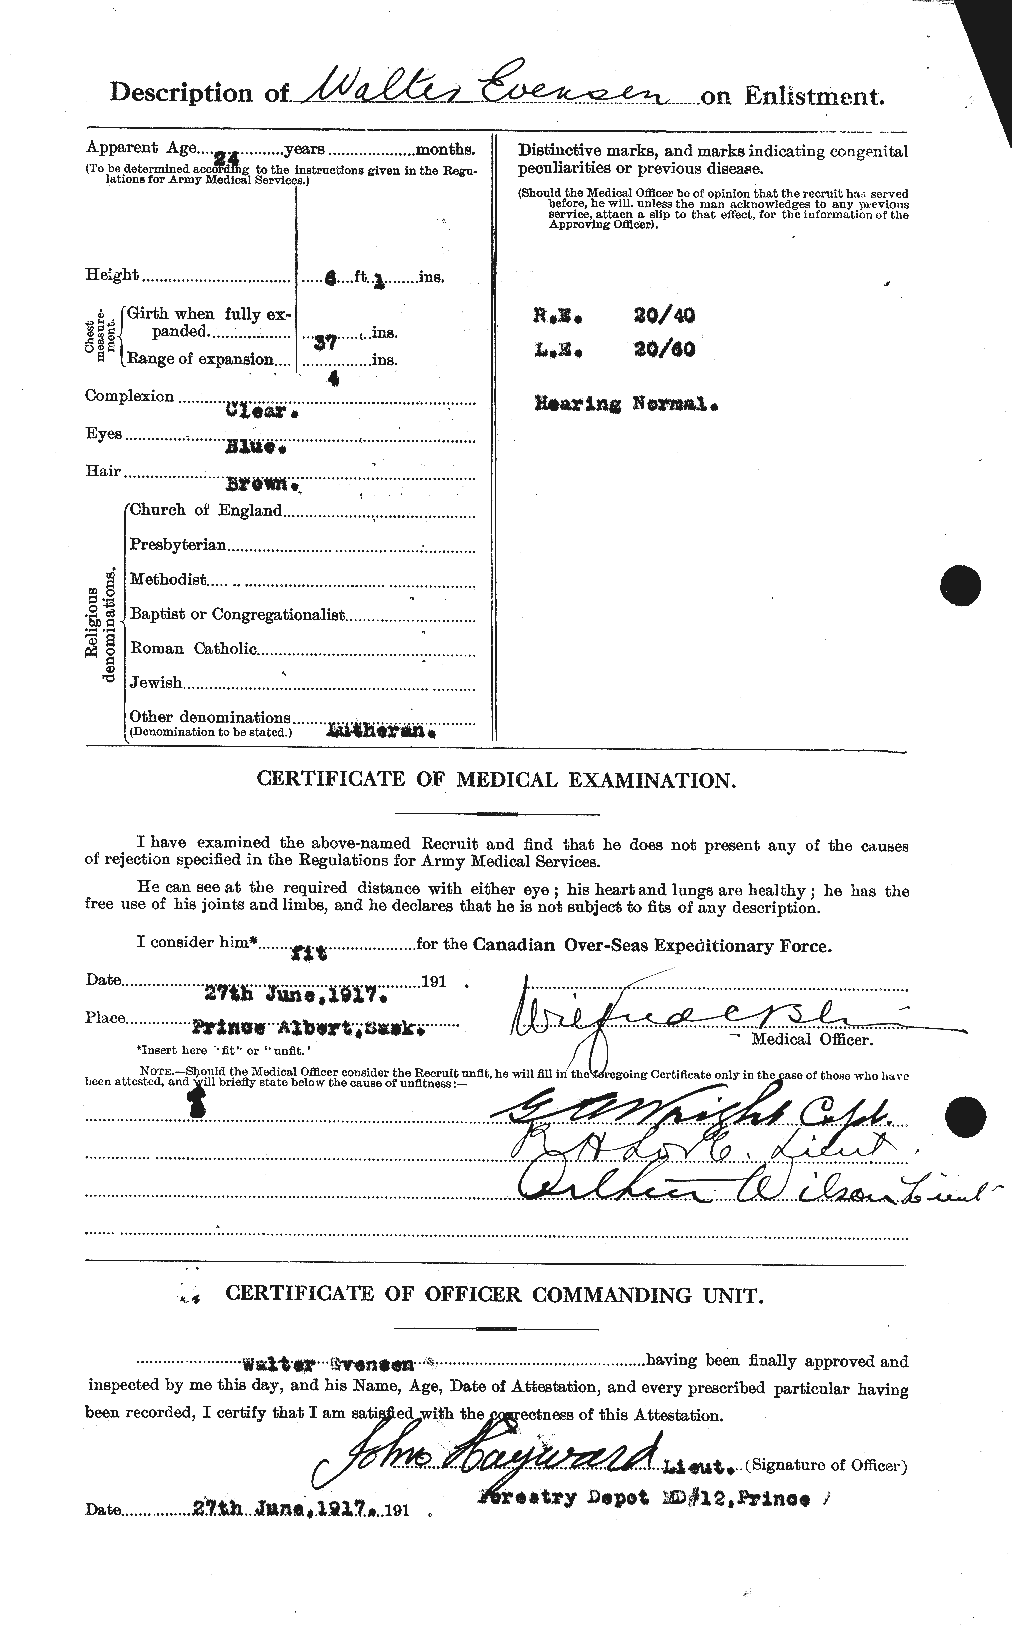 Personnel Records of the First World War - CEF 315741b